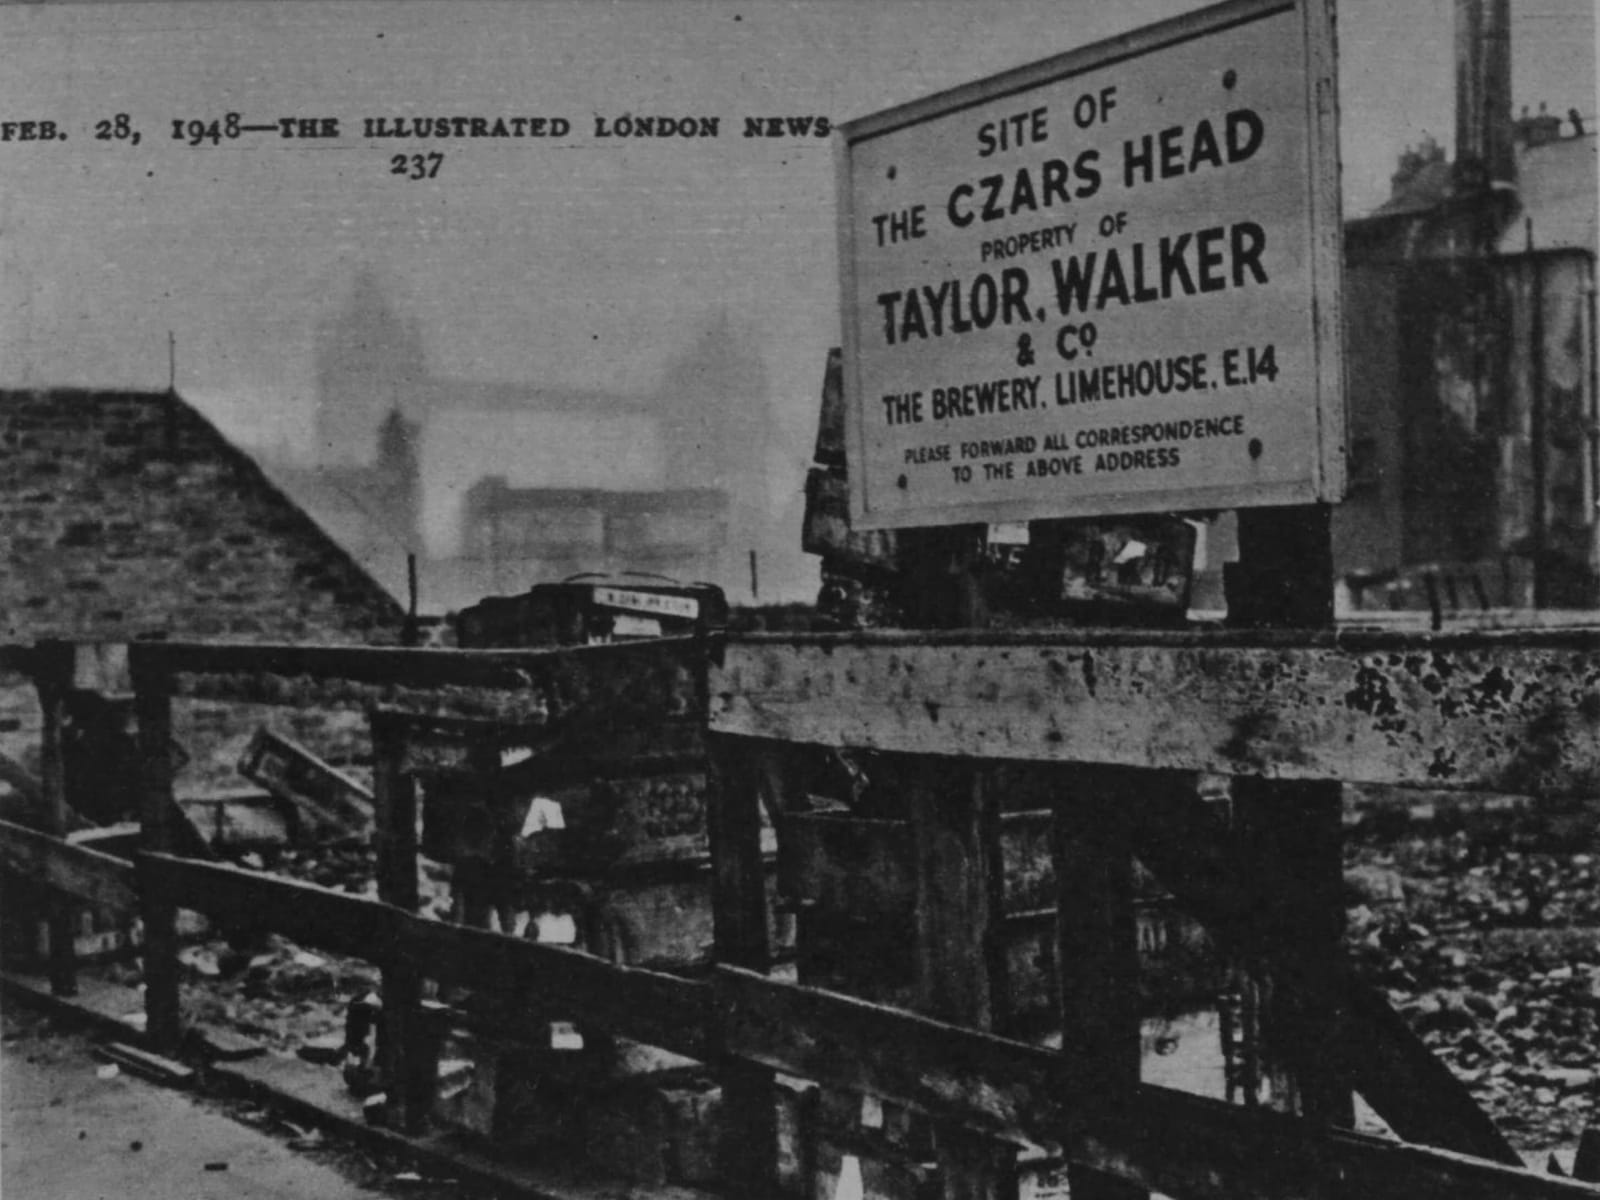 A wooden fence bars entry to rubble behind, with a sing protruding above it that reads, "Site of 'The Czars Head', property of Taylor, Walker & Co., The Brewery, Limehouse, E14. Please forward all correspondence to the above address."